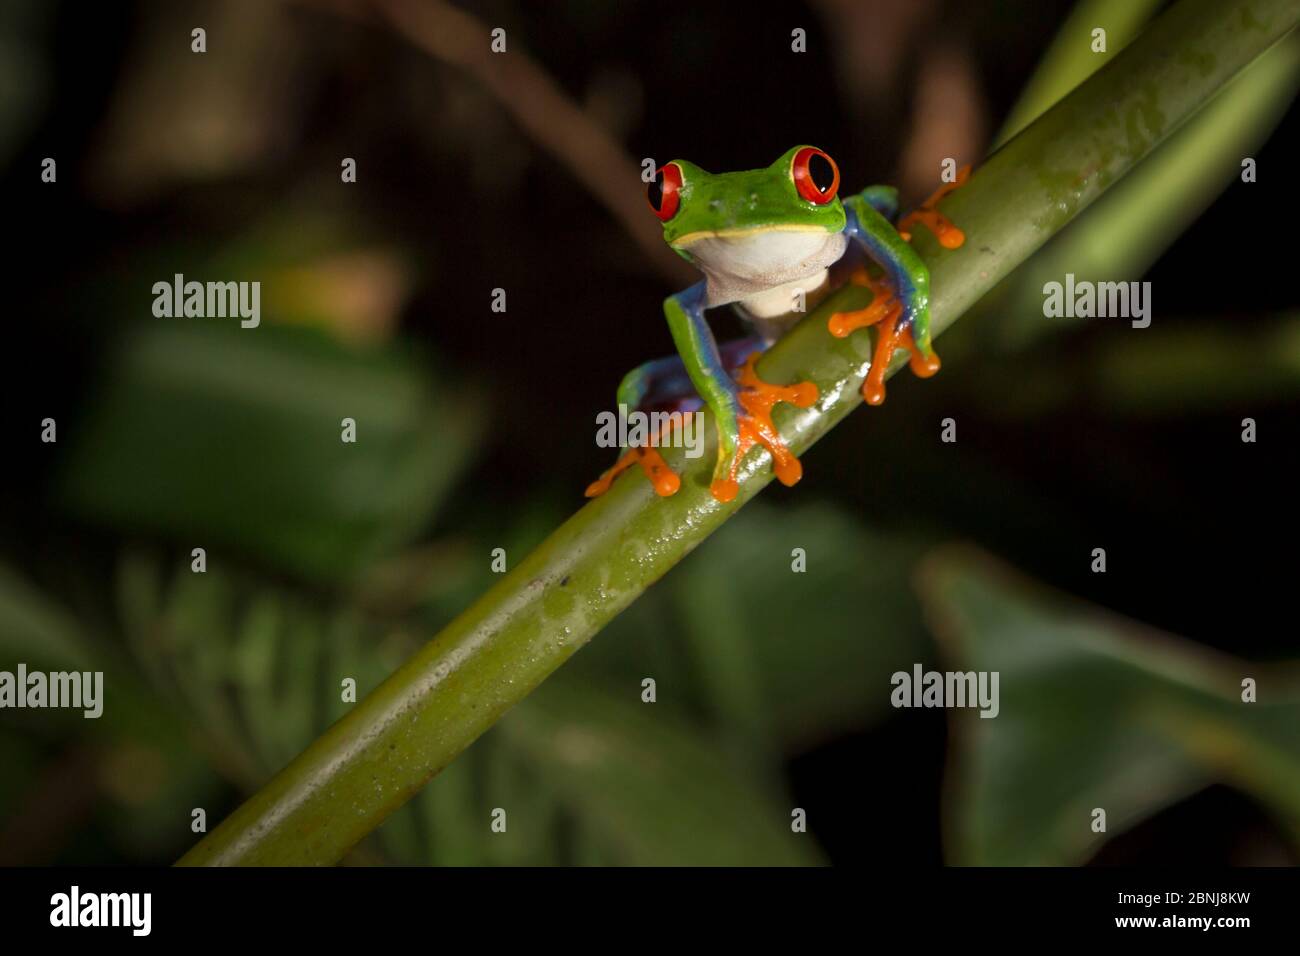 Red-eyed leaf frog (Agalychnis callidryas) male, Central Caribbean foothills, Costa Rica. Stock Photo